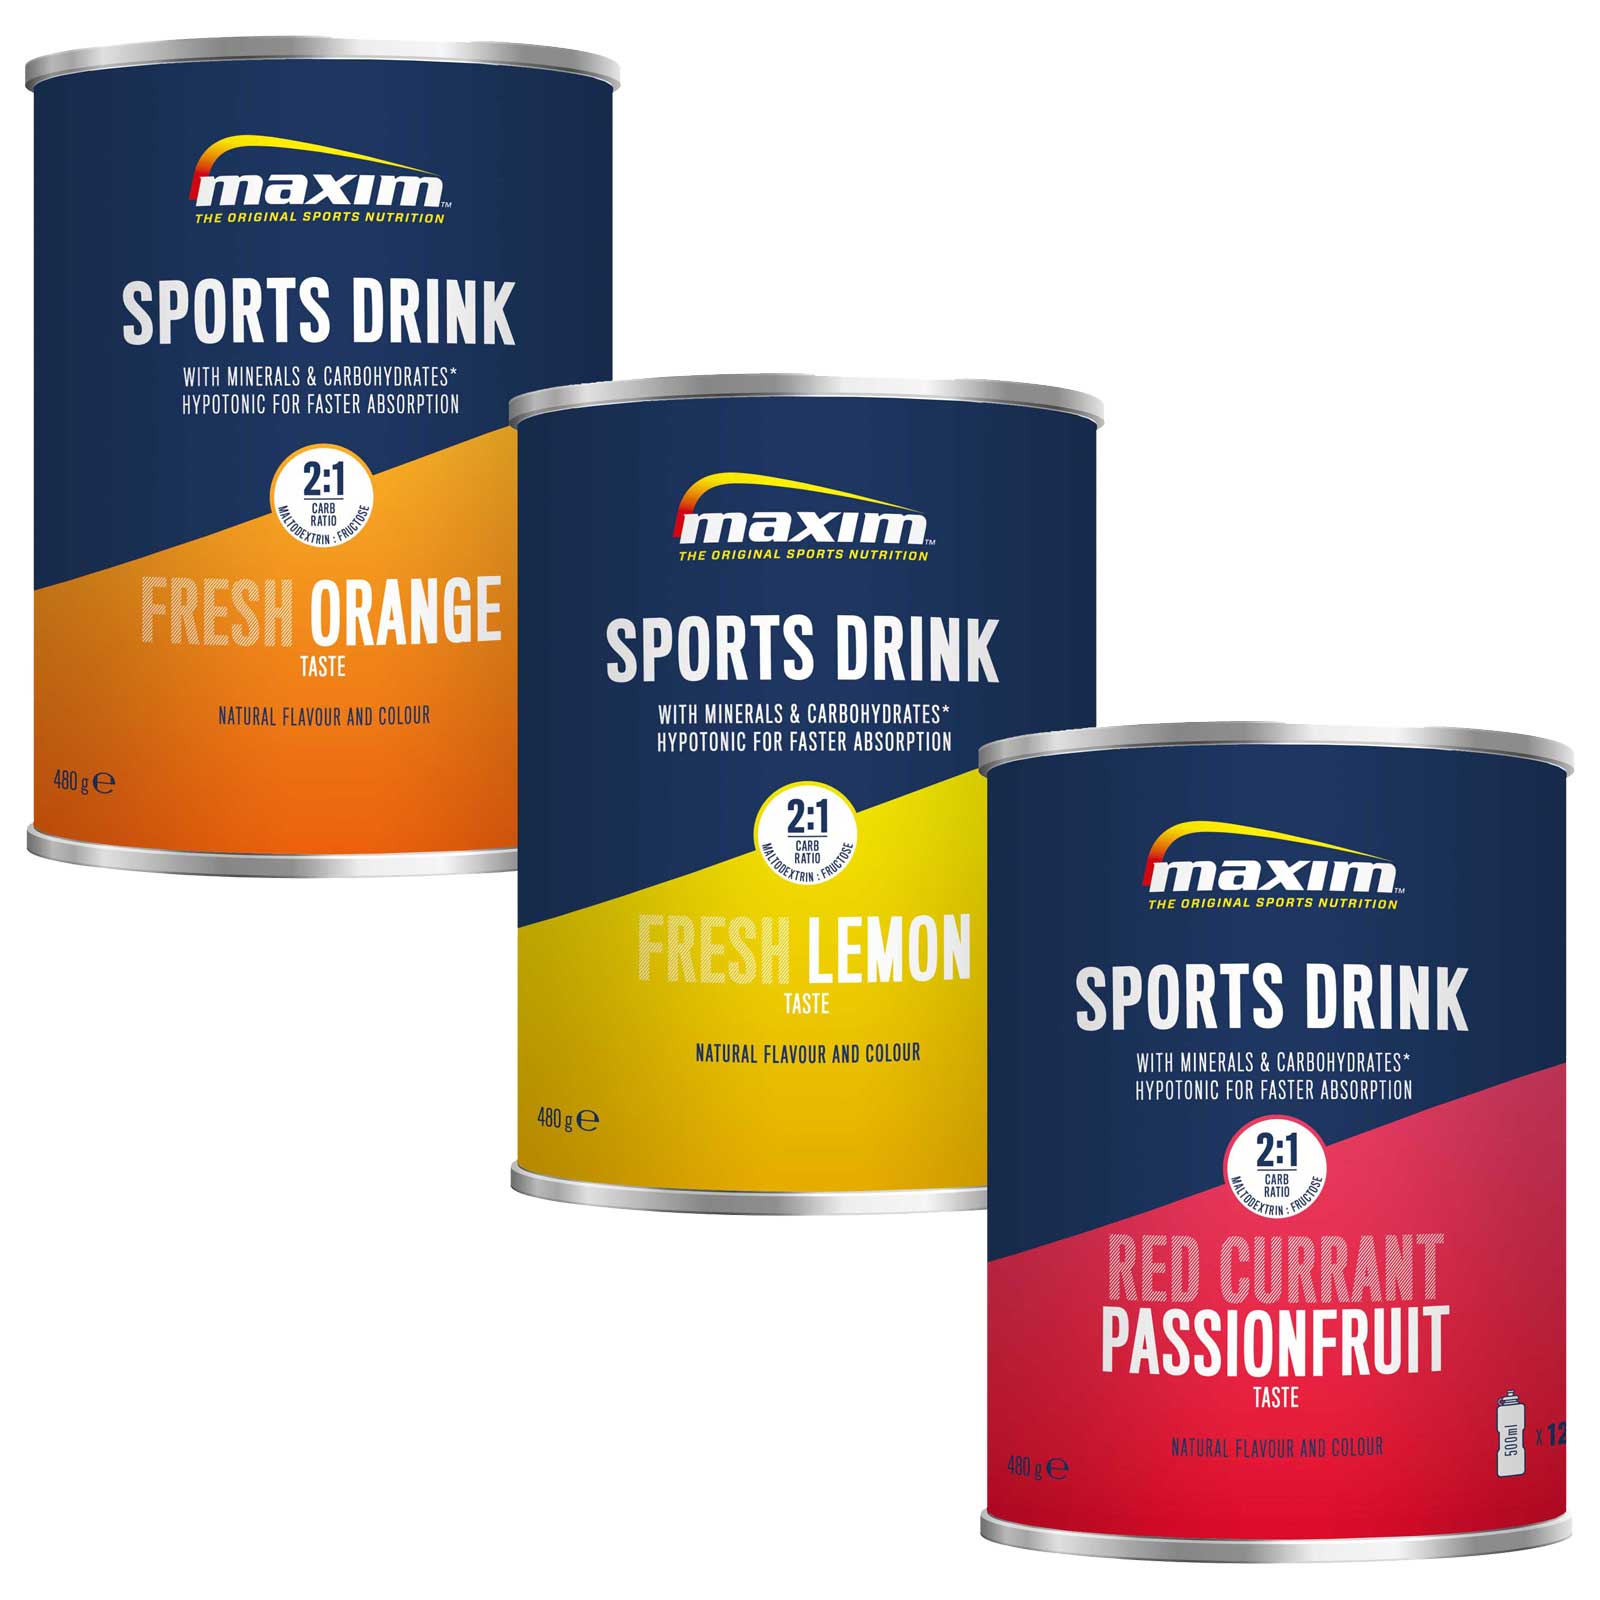 Productfoto van Maxim Sports Drink - Hypotonic Carbohydrate Beverage Powder - 480g Can